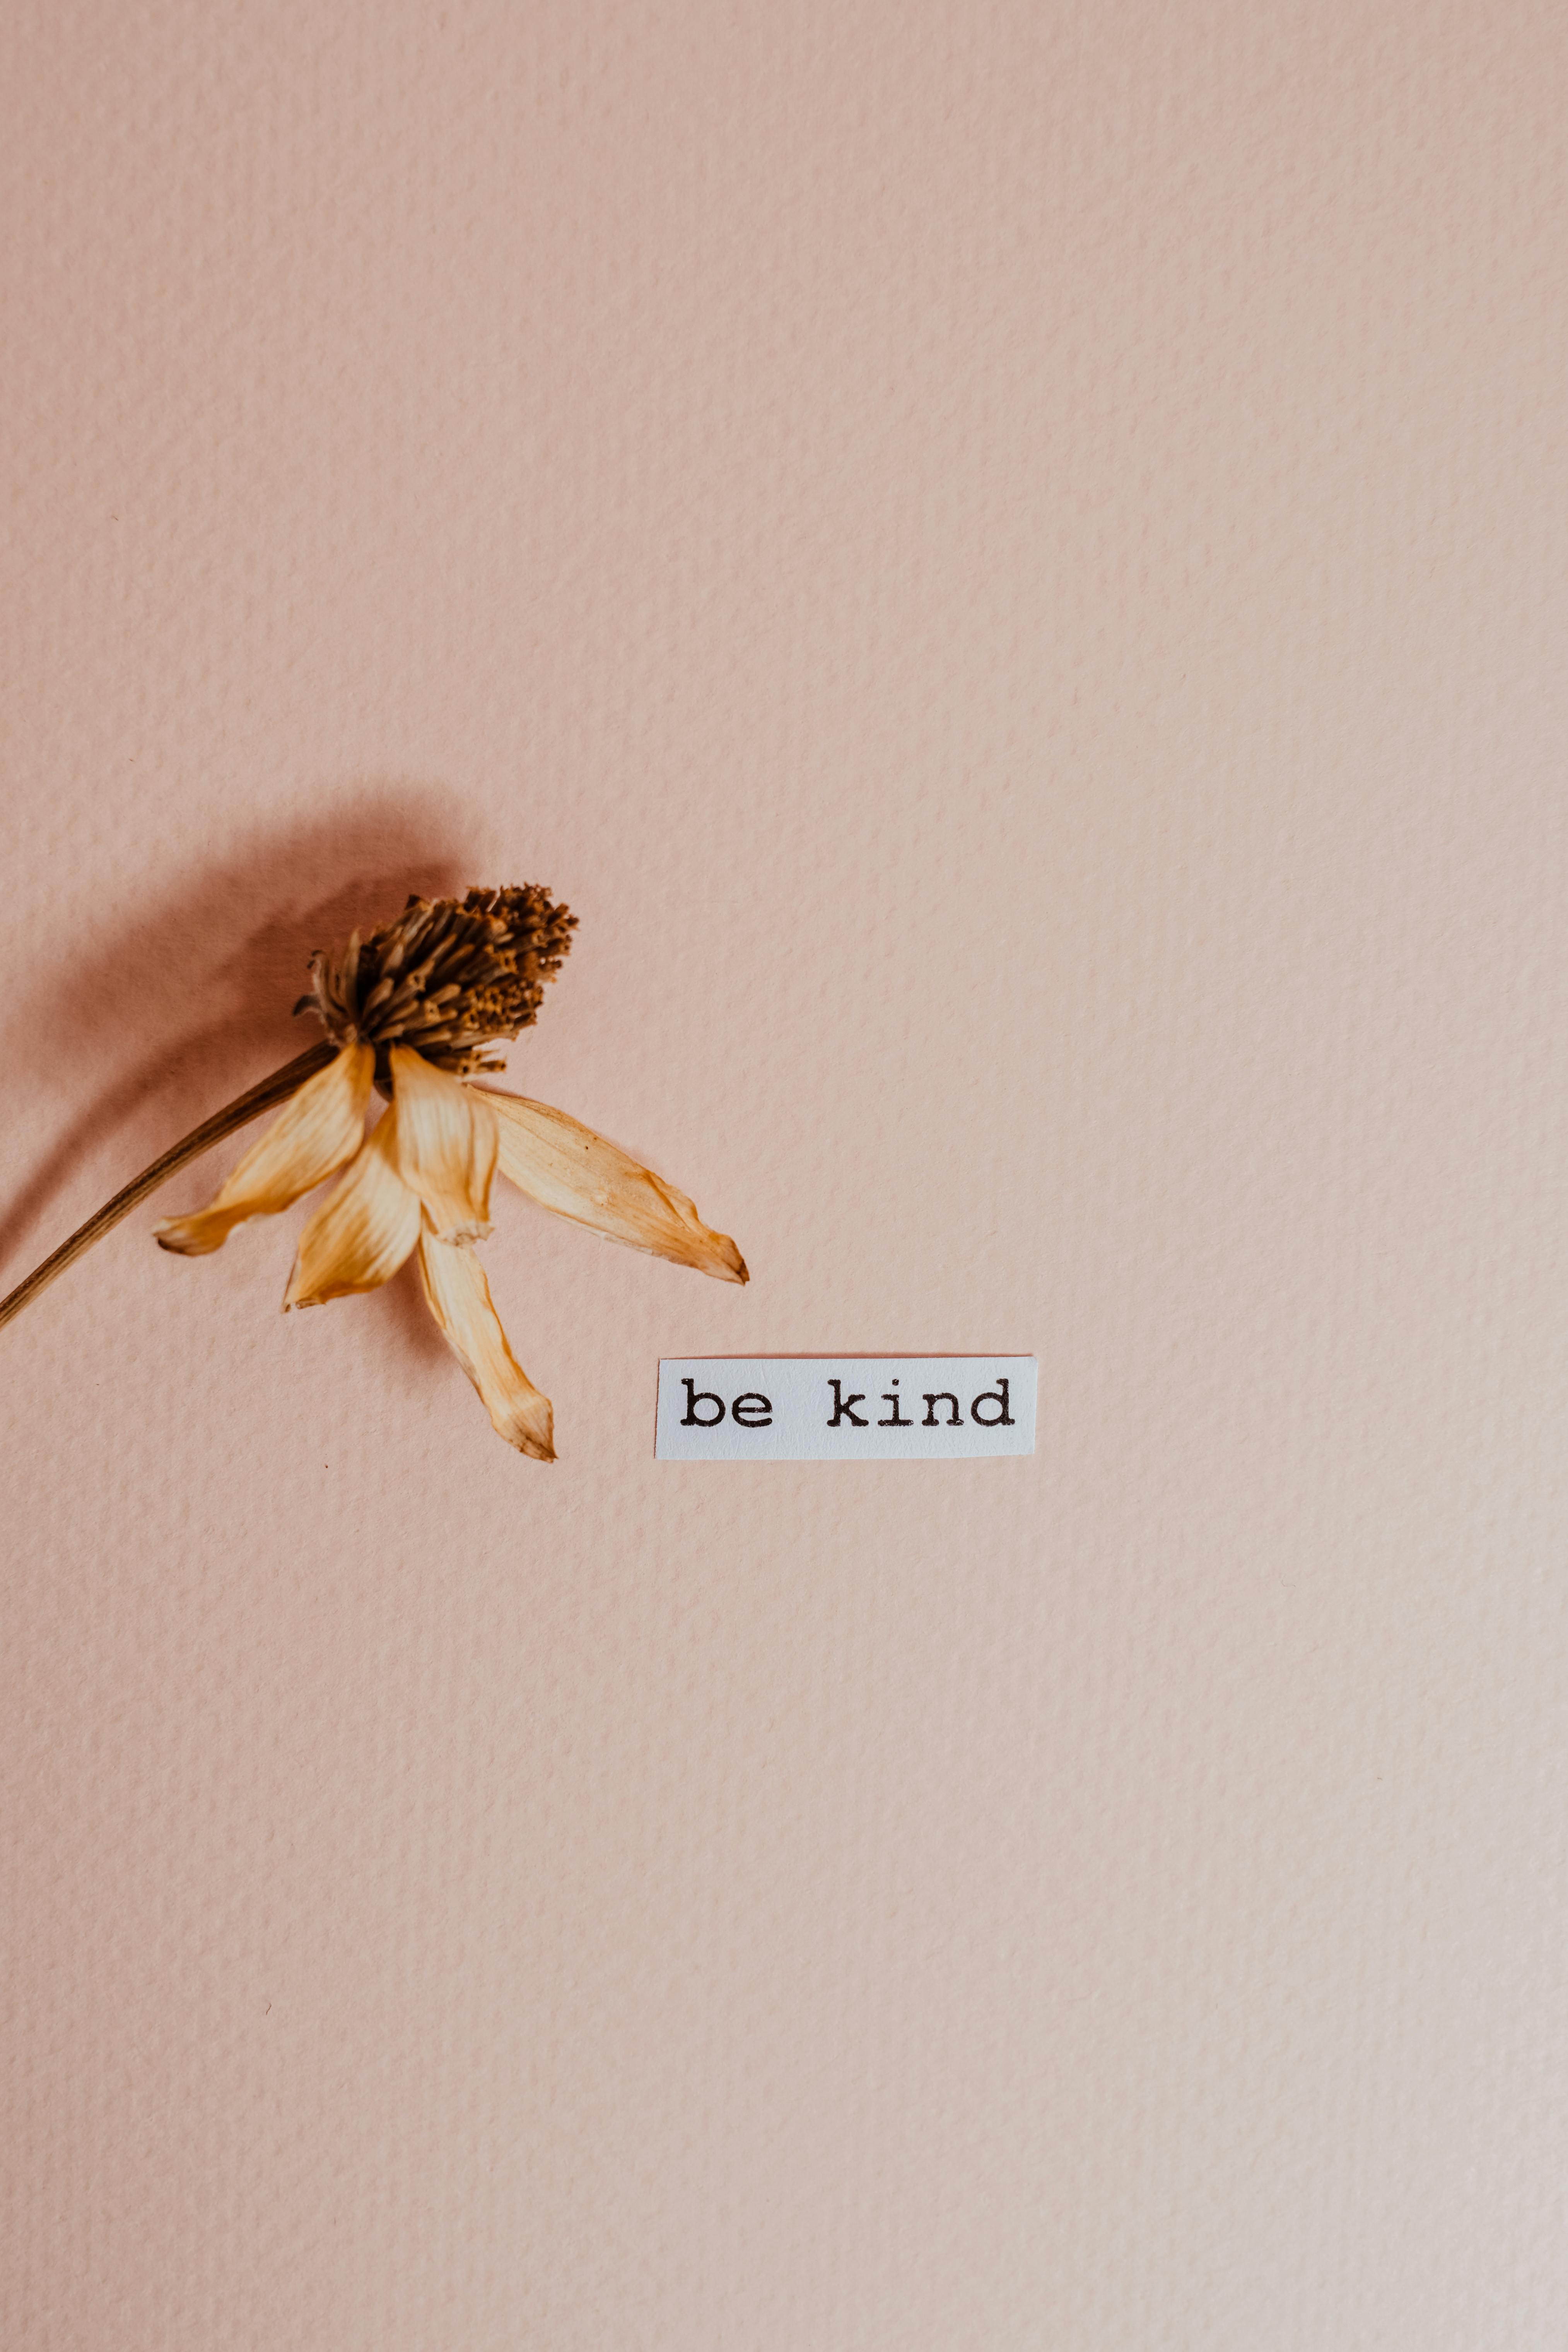 Be Kind Images | Free Photos, PNG Stickers, Wallpapers & Backgrounds -  rawpixel